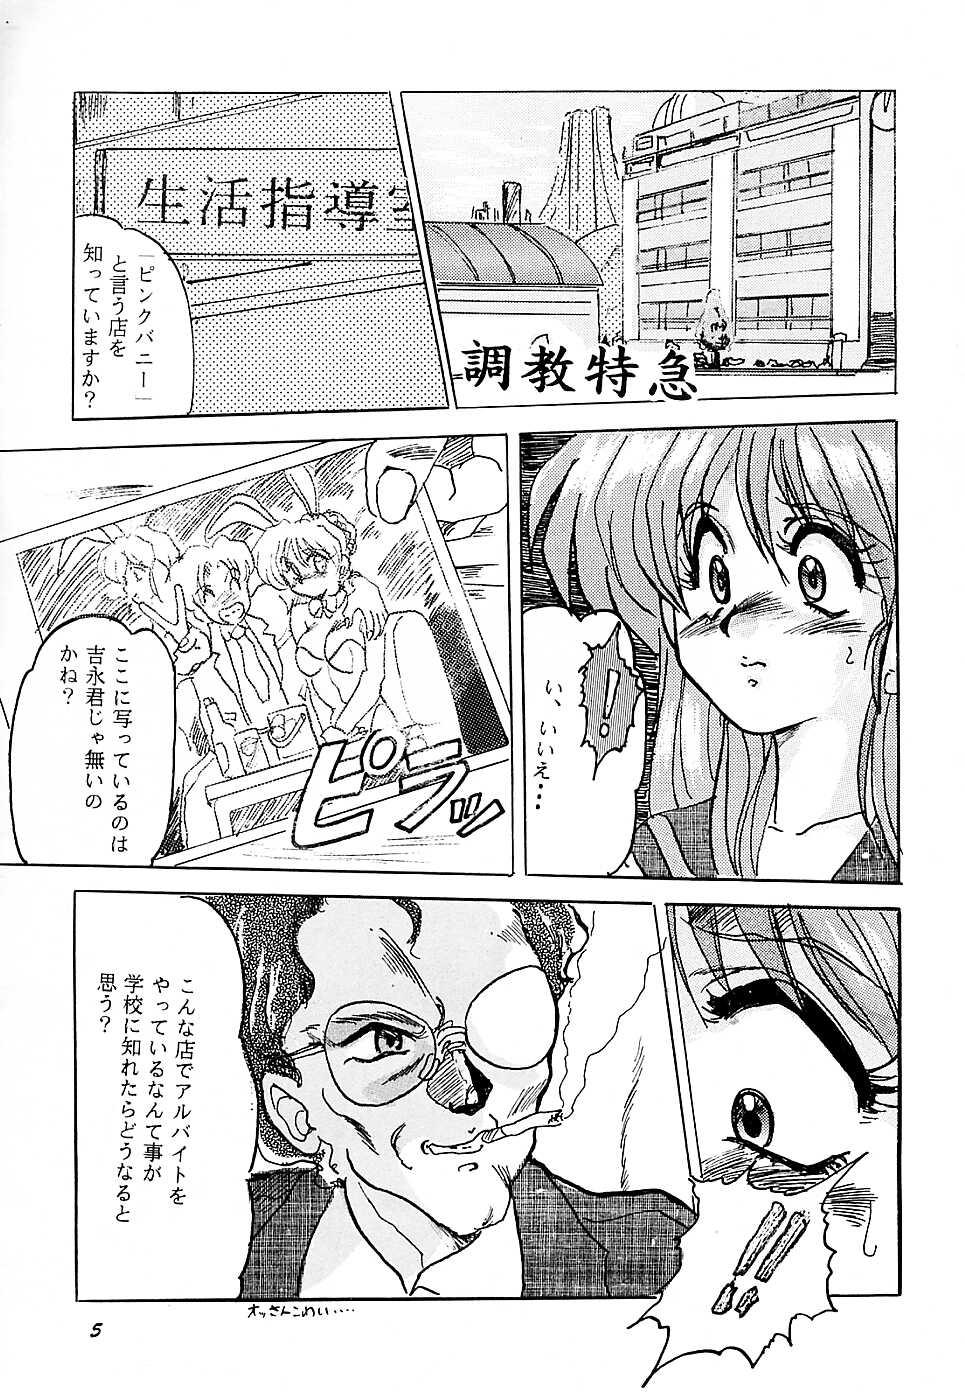 Fit F 93C - Brave express might gaine Big Dicks - Page 4